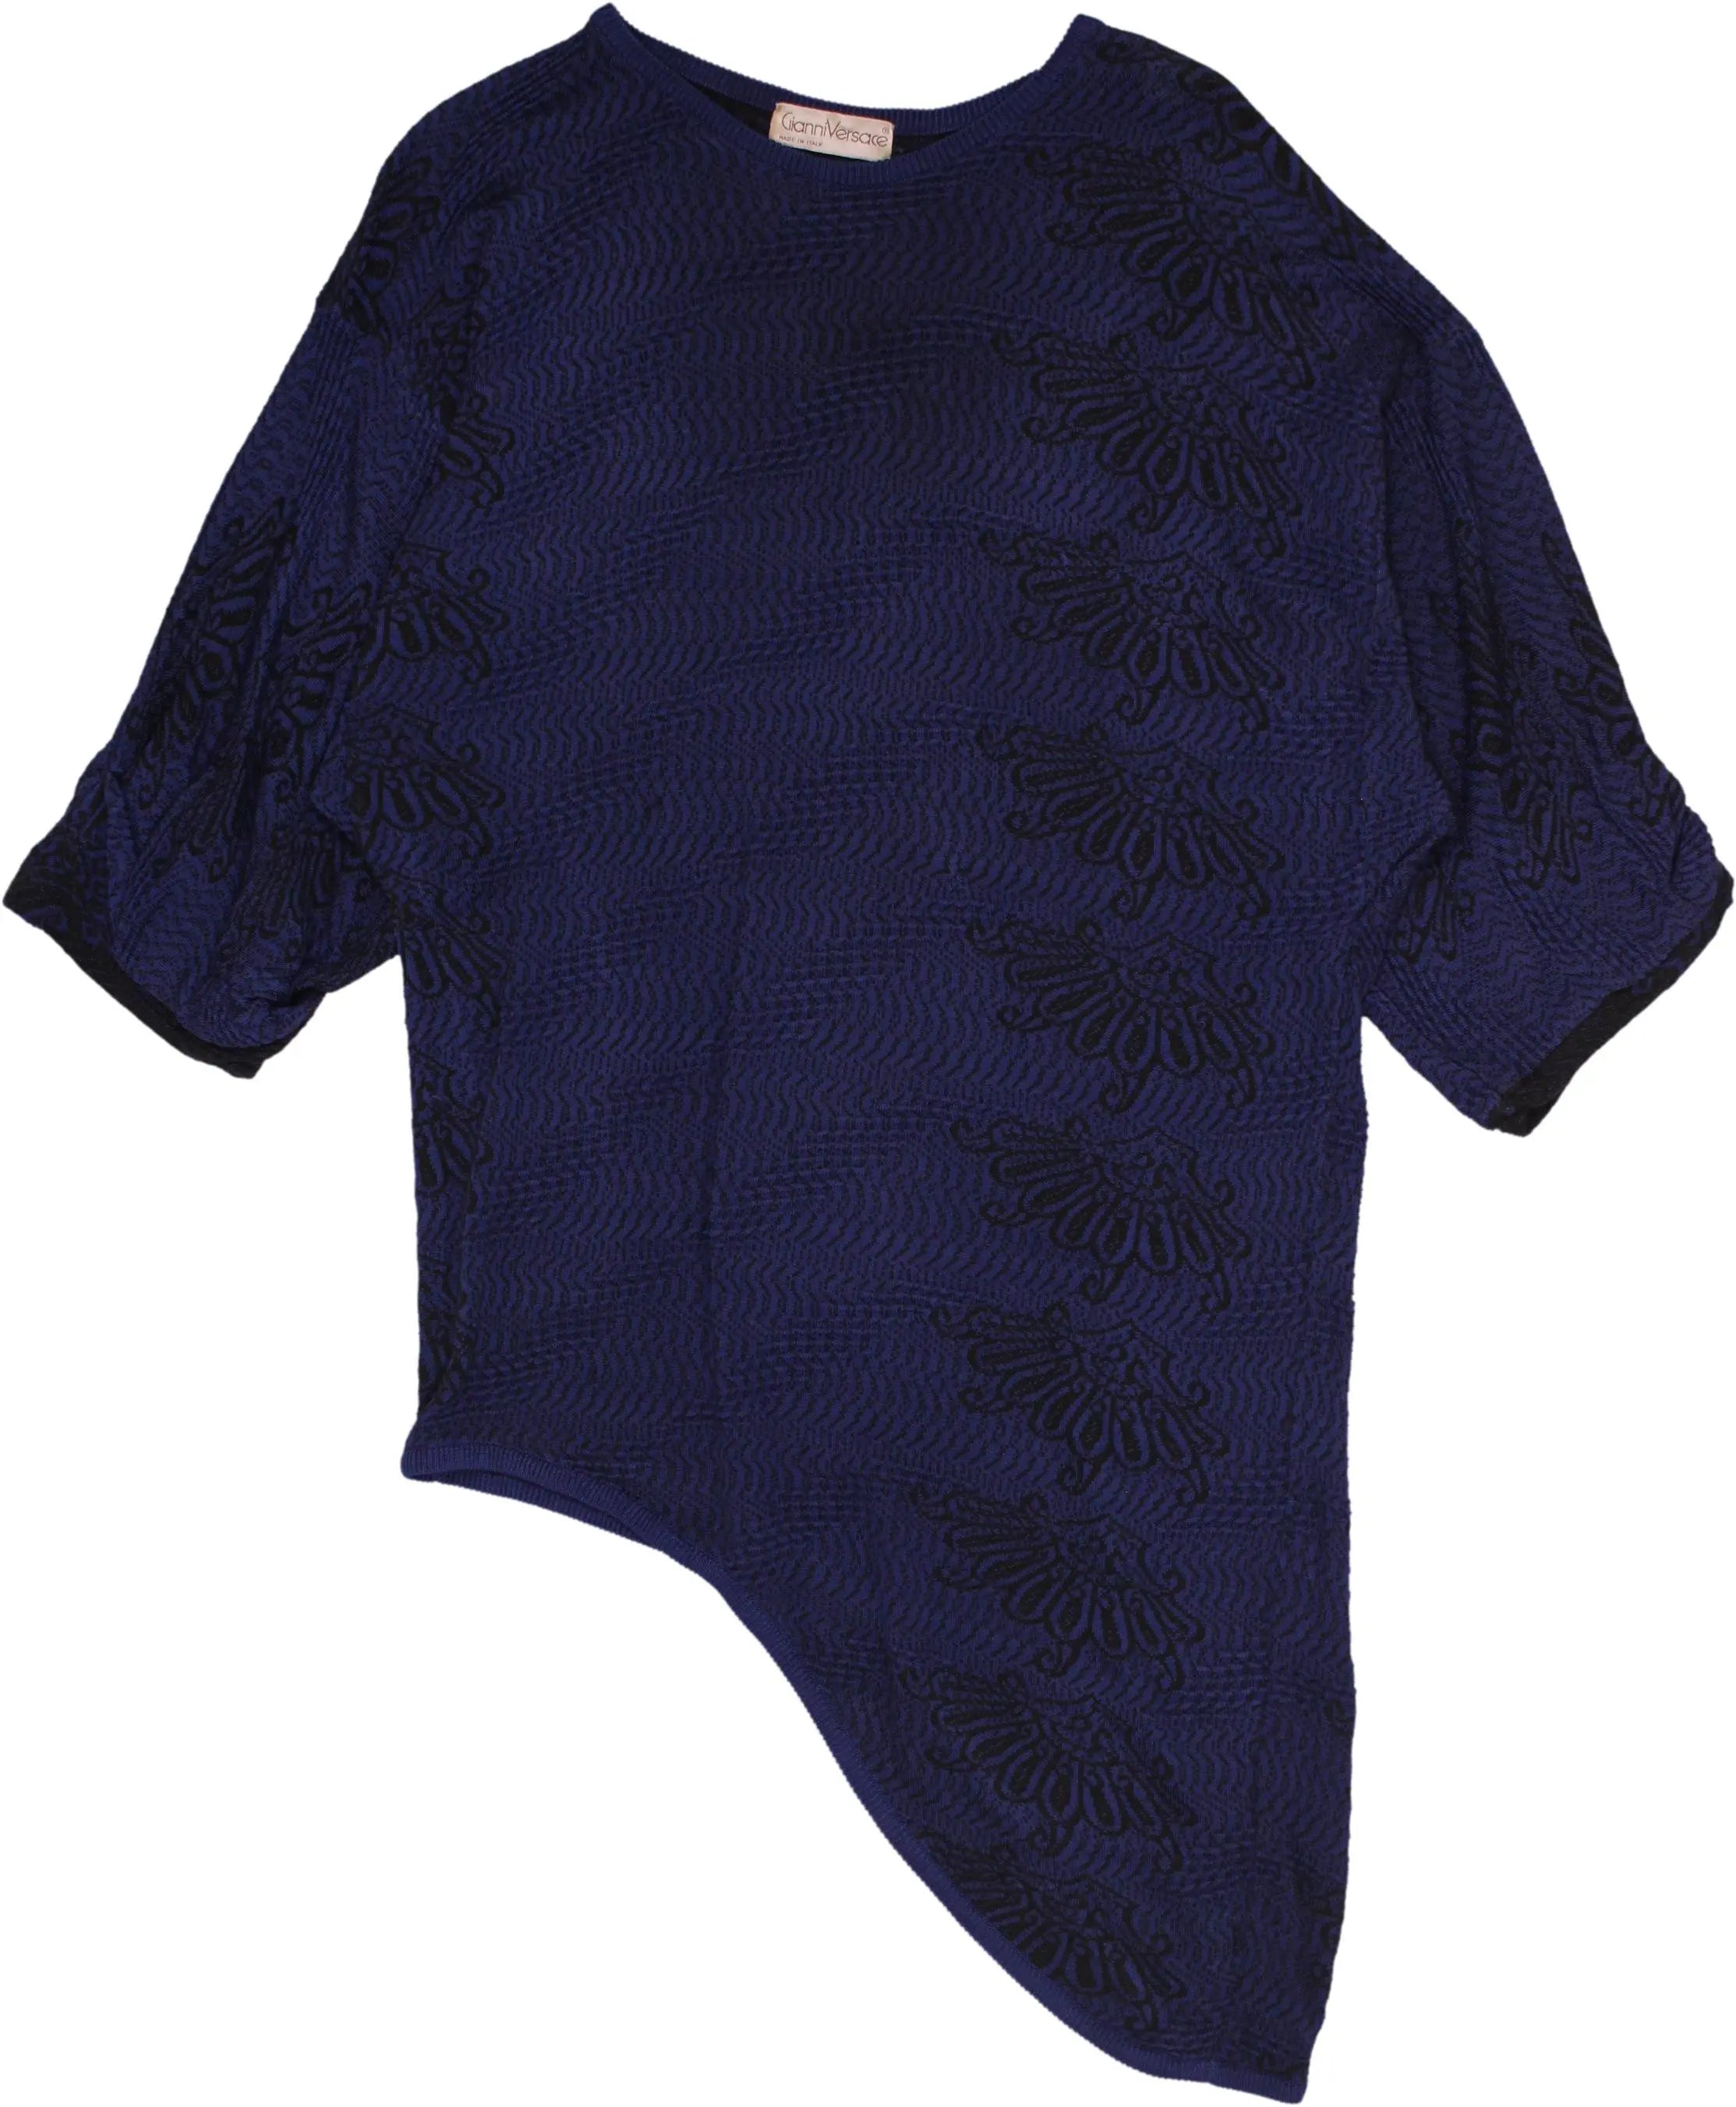 Gianni Versace - Vintage Knitted Asymmetric Top By Gianni Versace- ThriftTale.com - Vintage and second handclothing